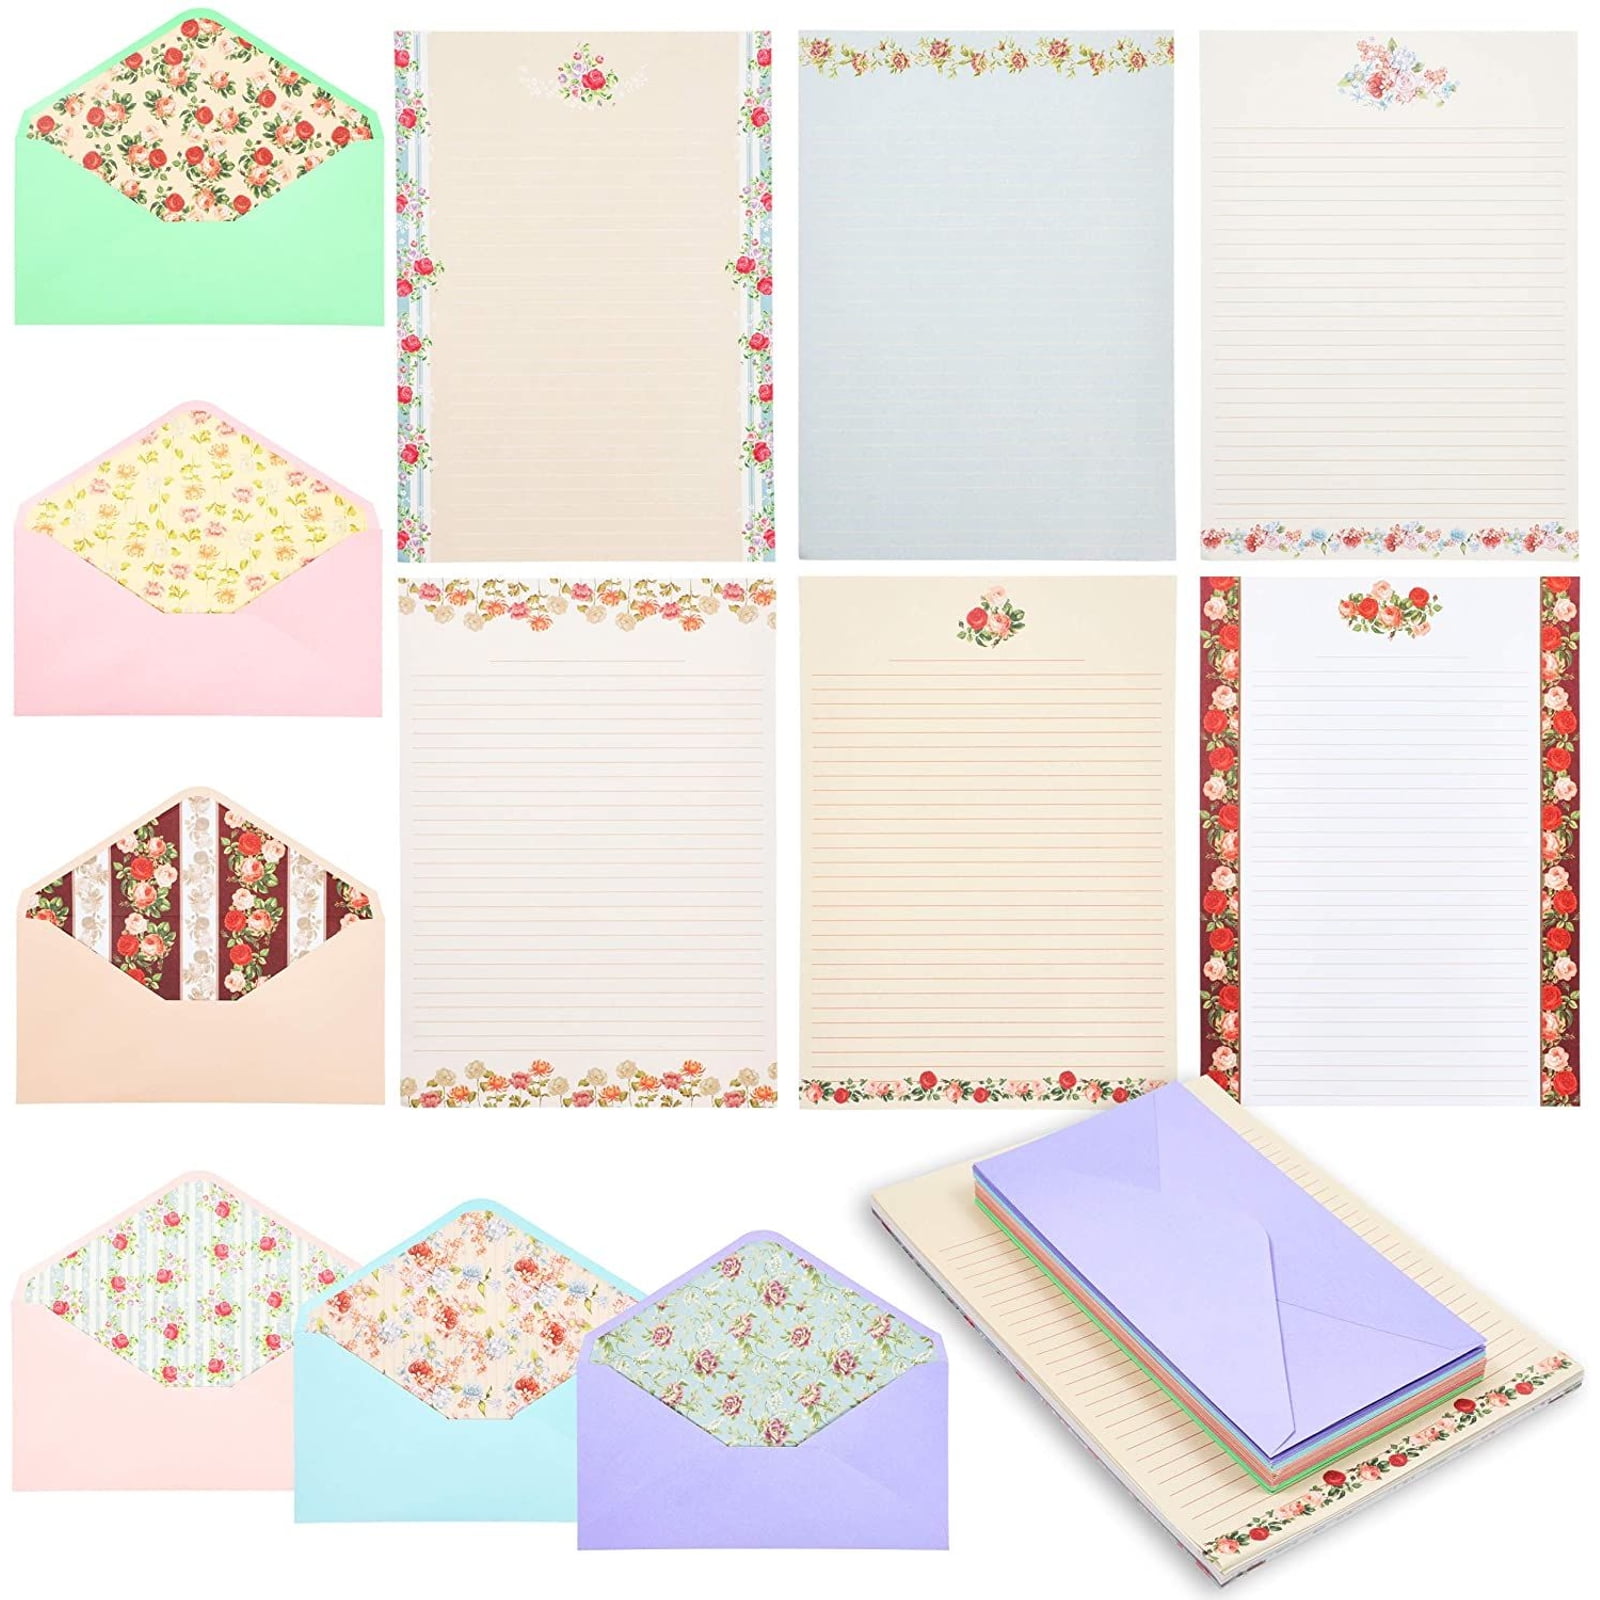 Dahey 30Pcs Vintage Stationery Floral Writting Paper Matching Envelopes Sets for 